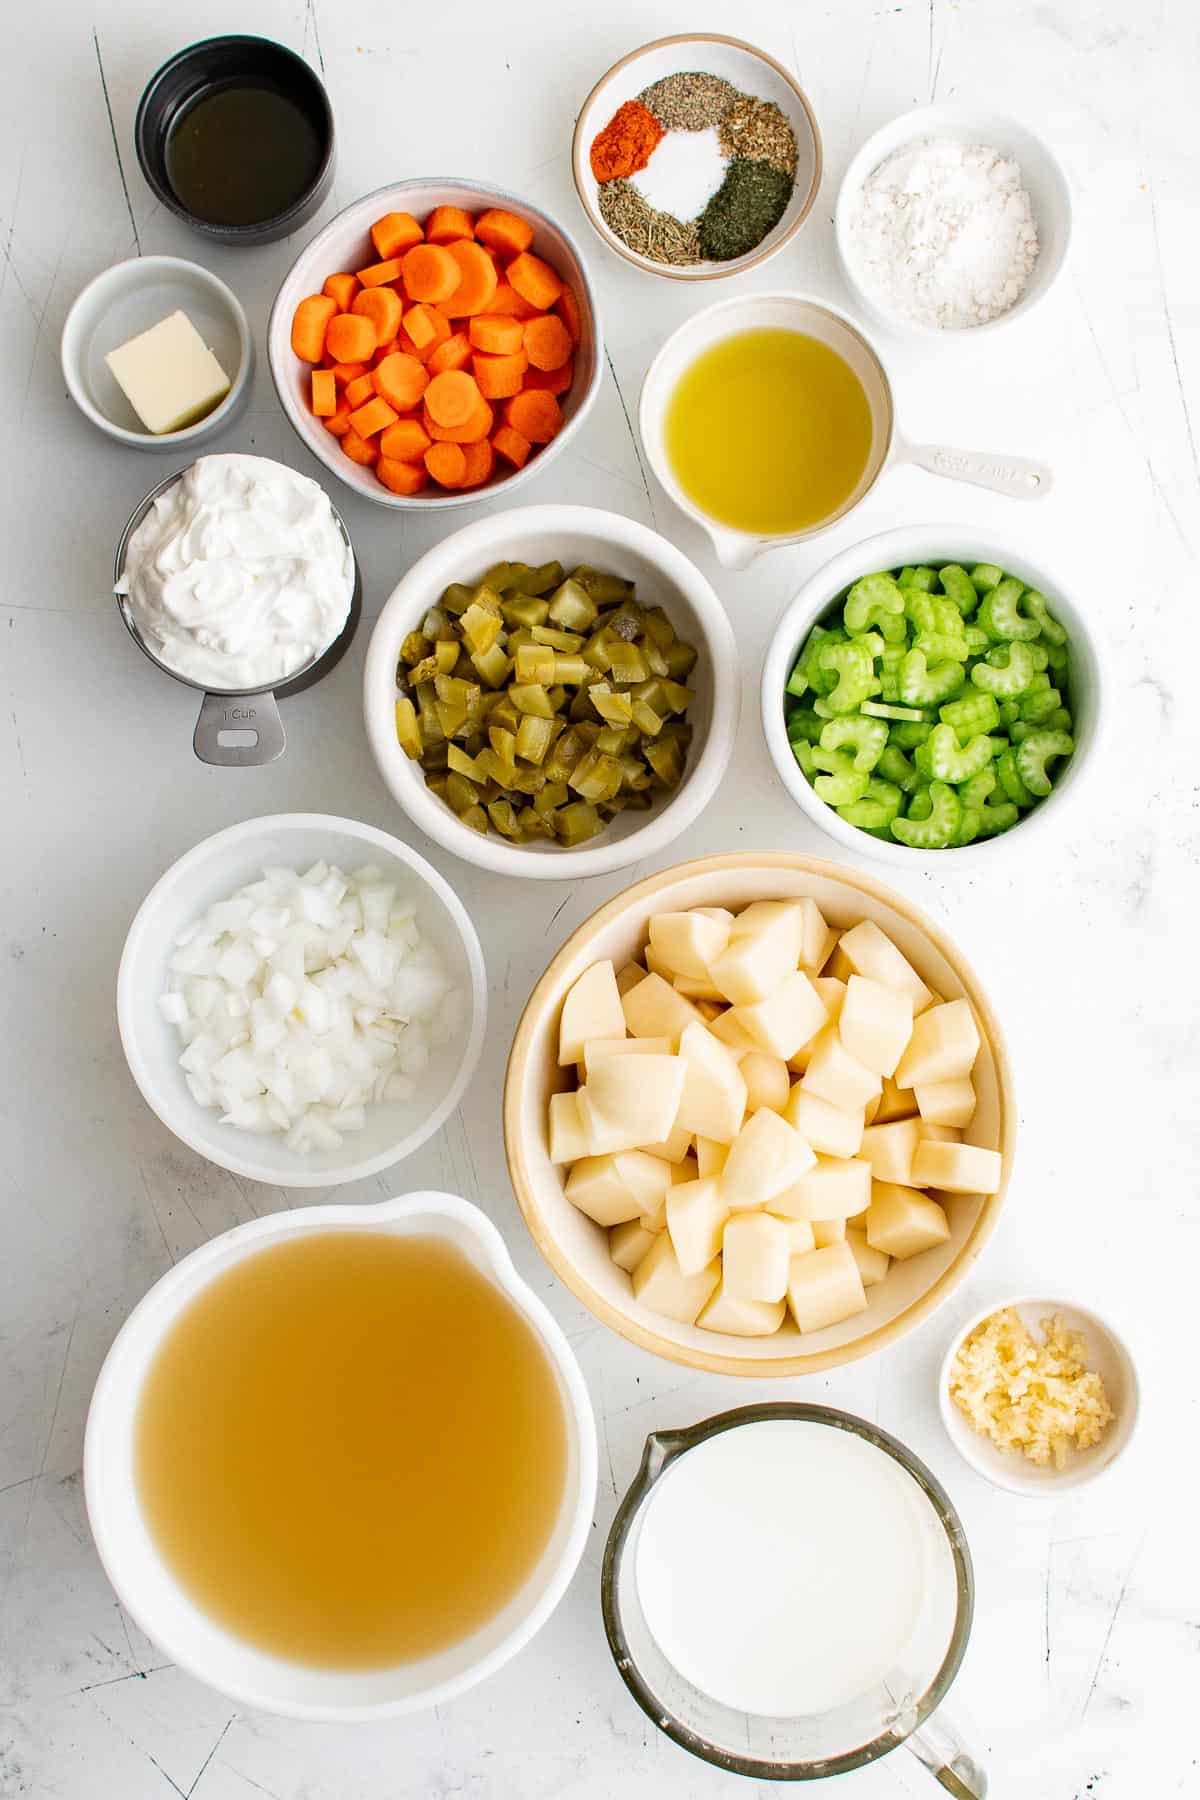 ingredients for soup - potatoes, pickles, celery, onion, carrot, broth, garlic, salt, butter, cream